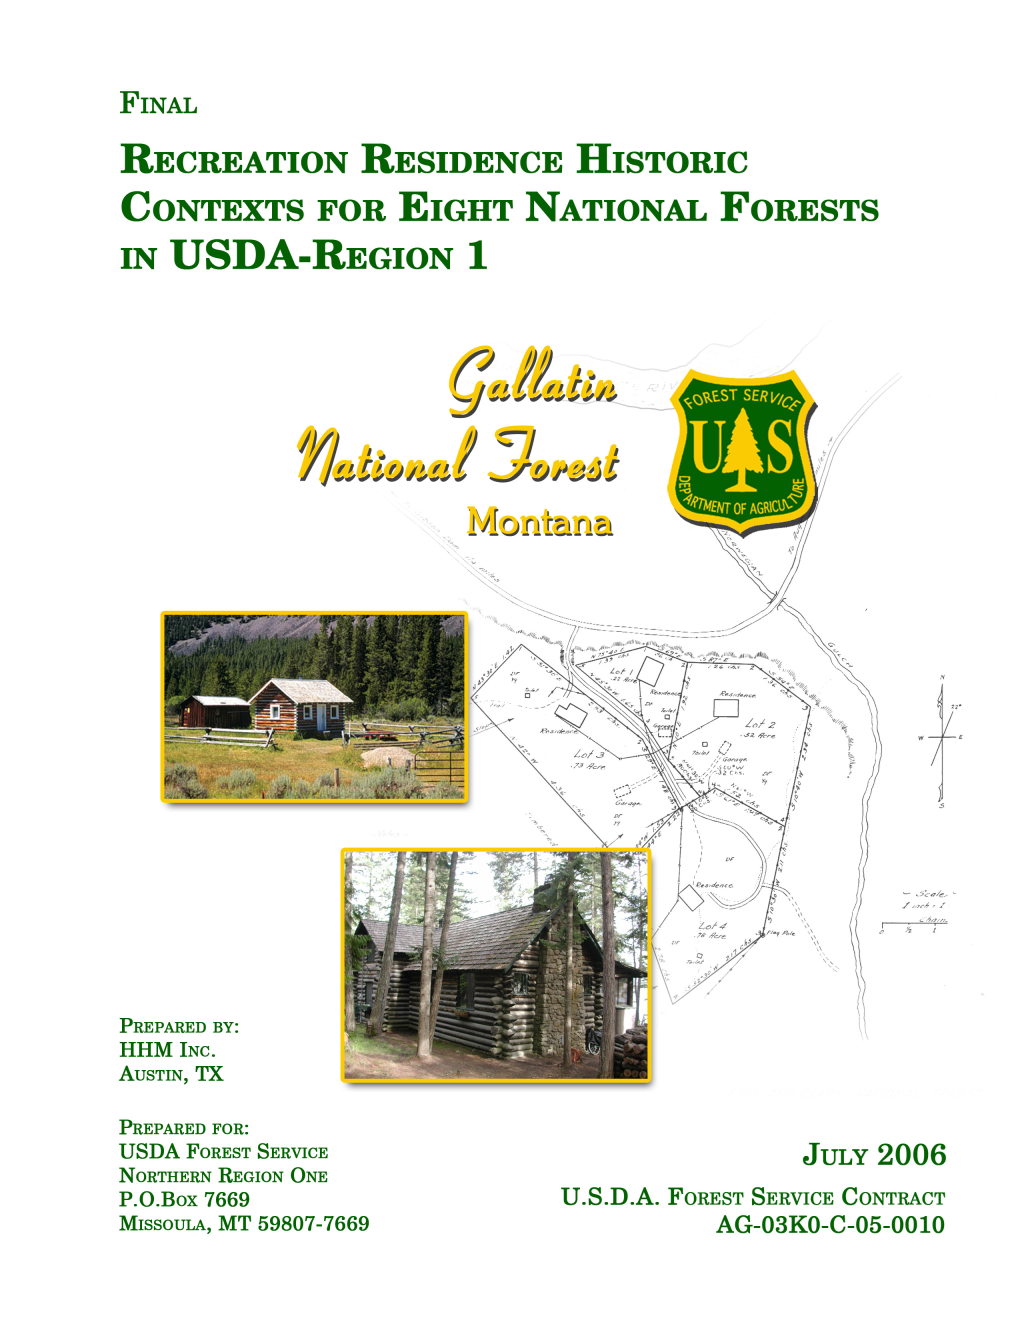 Recreational Residence Historic Contexts for Eight National Forests